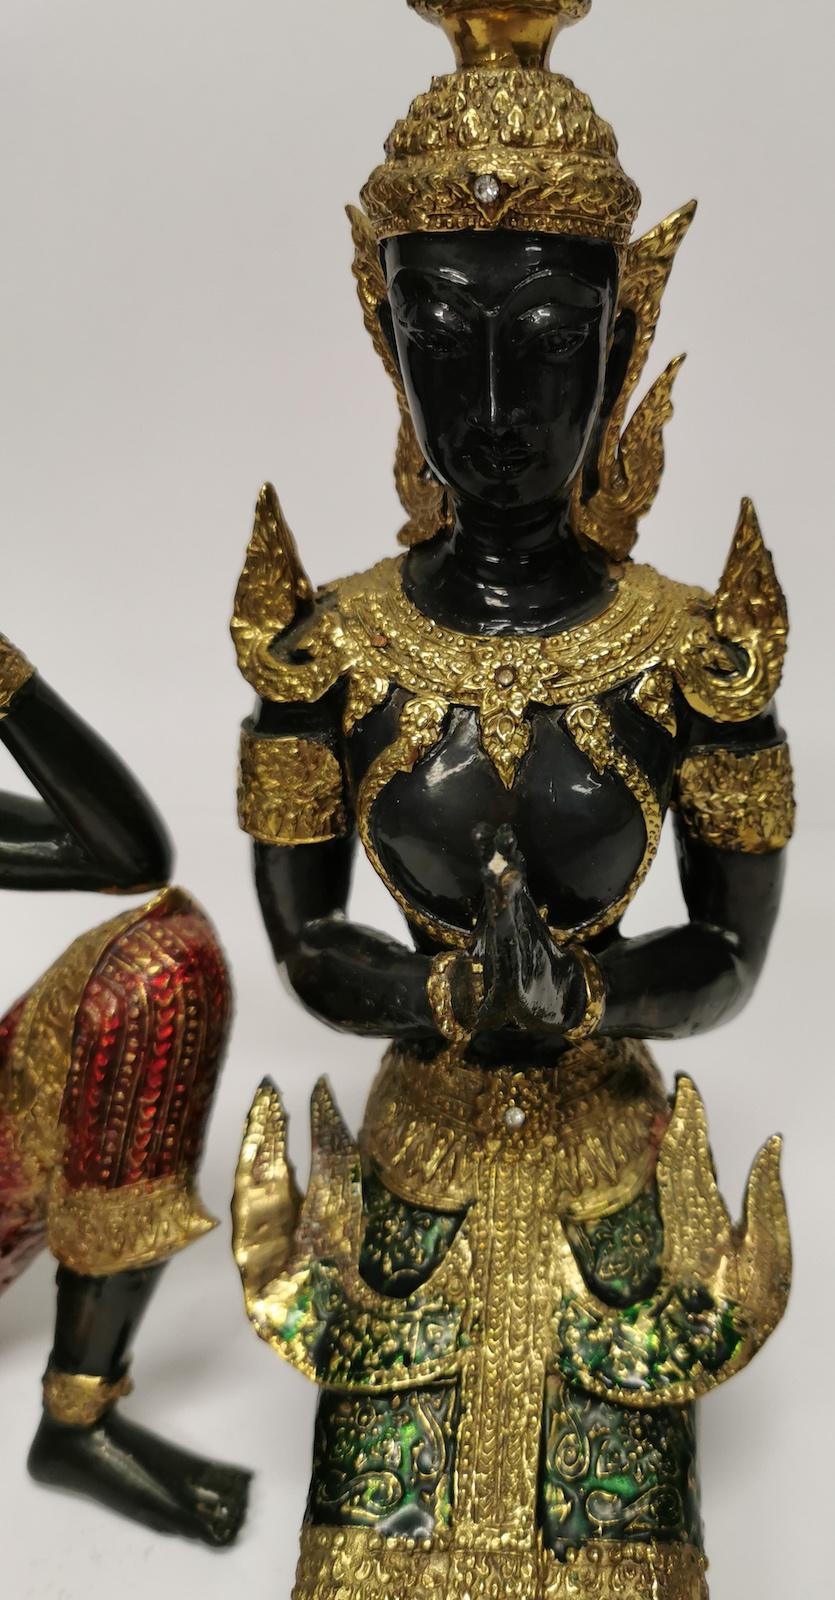 Pair of Thai enameled brass figures.
Saraswati, the Goddess of Music (21 x 12 x 26 cm high) and Theppanom Guardian Angel (11 x 13 x 32cm high) with very fine detail,
circa 1990.
Total weight: 4.4kg.
Our eclectic stock crosses cultures, continents,